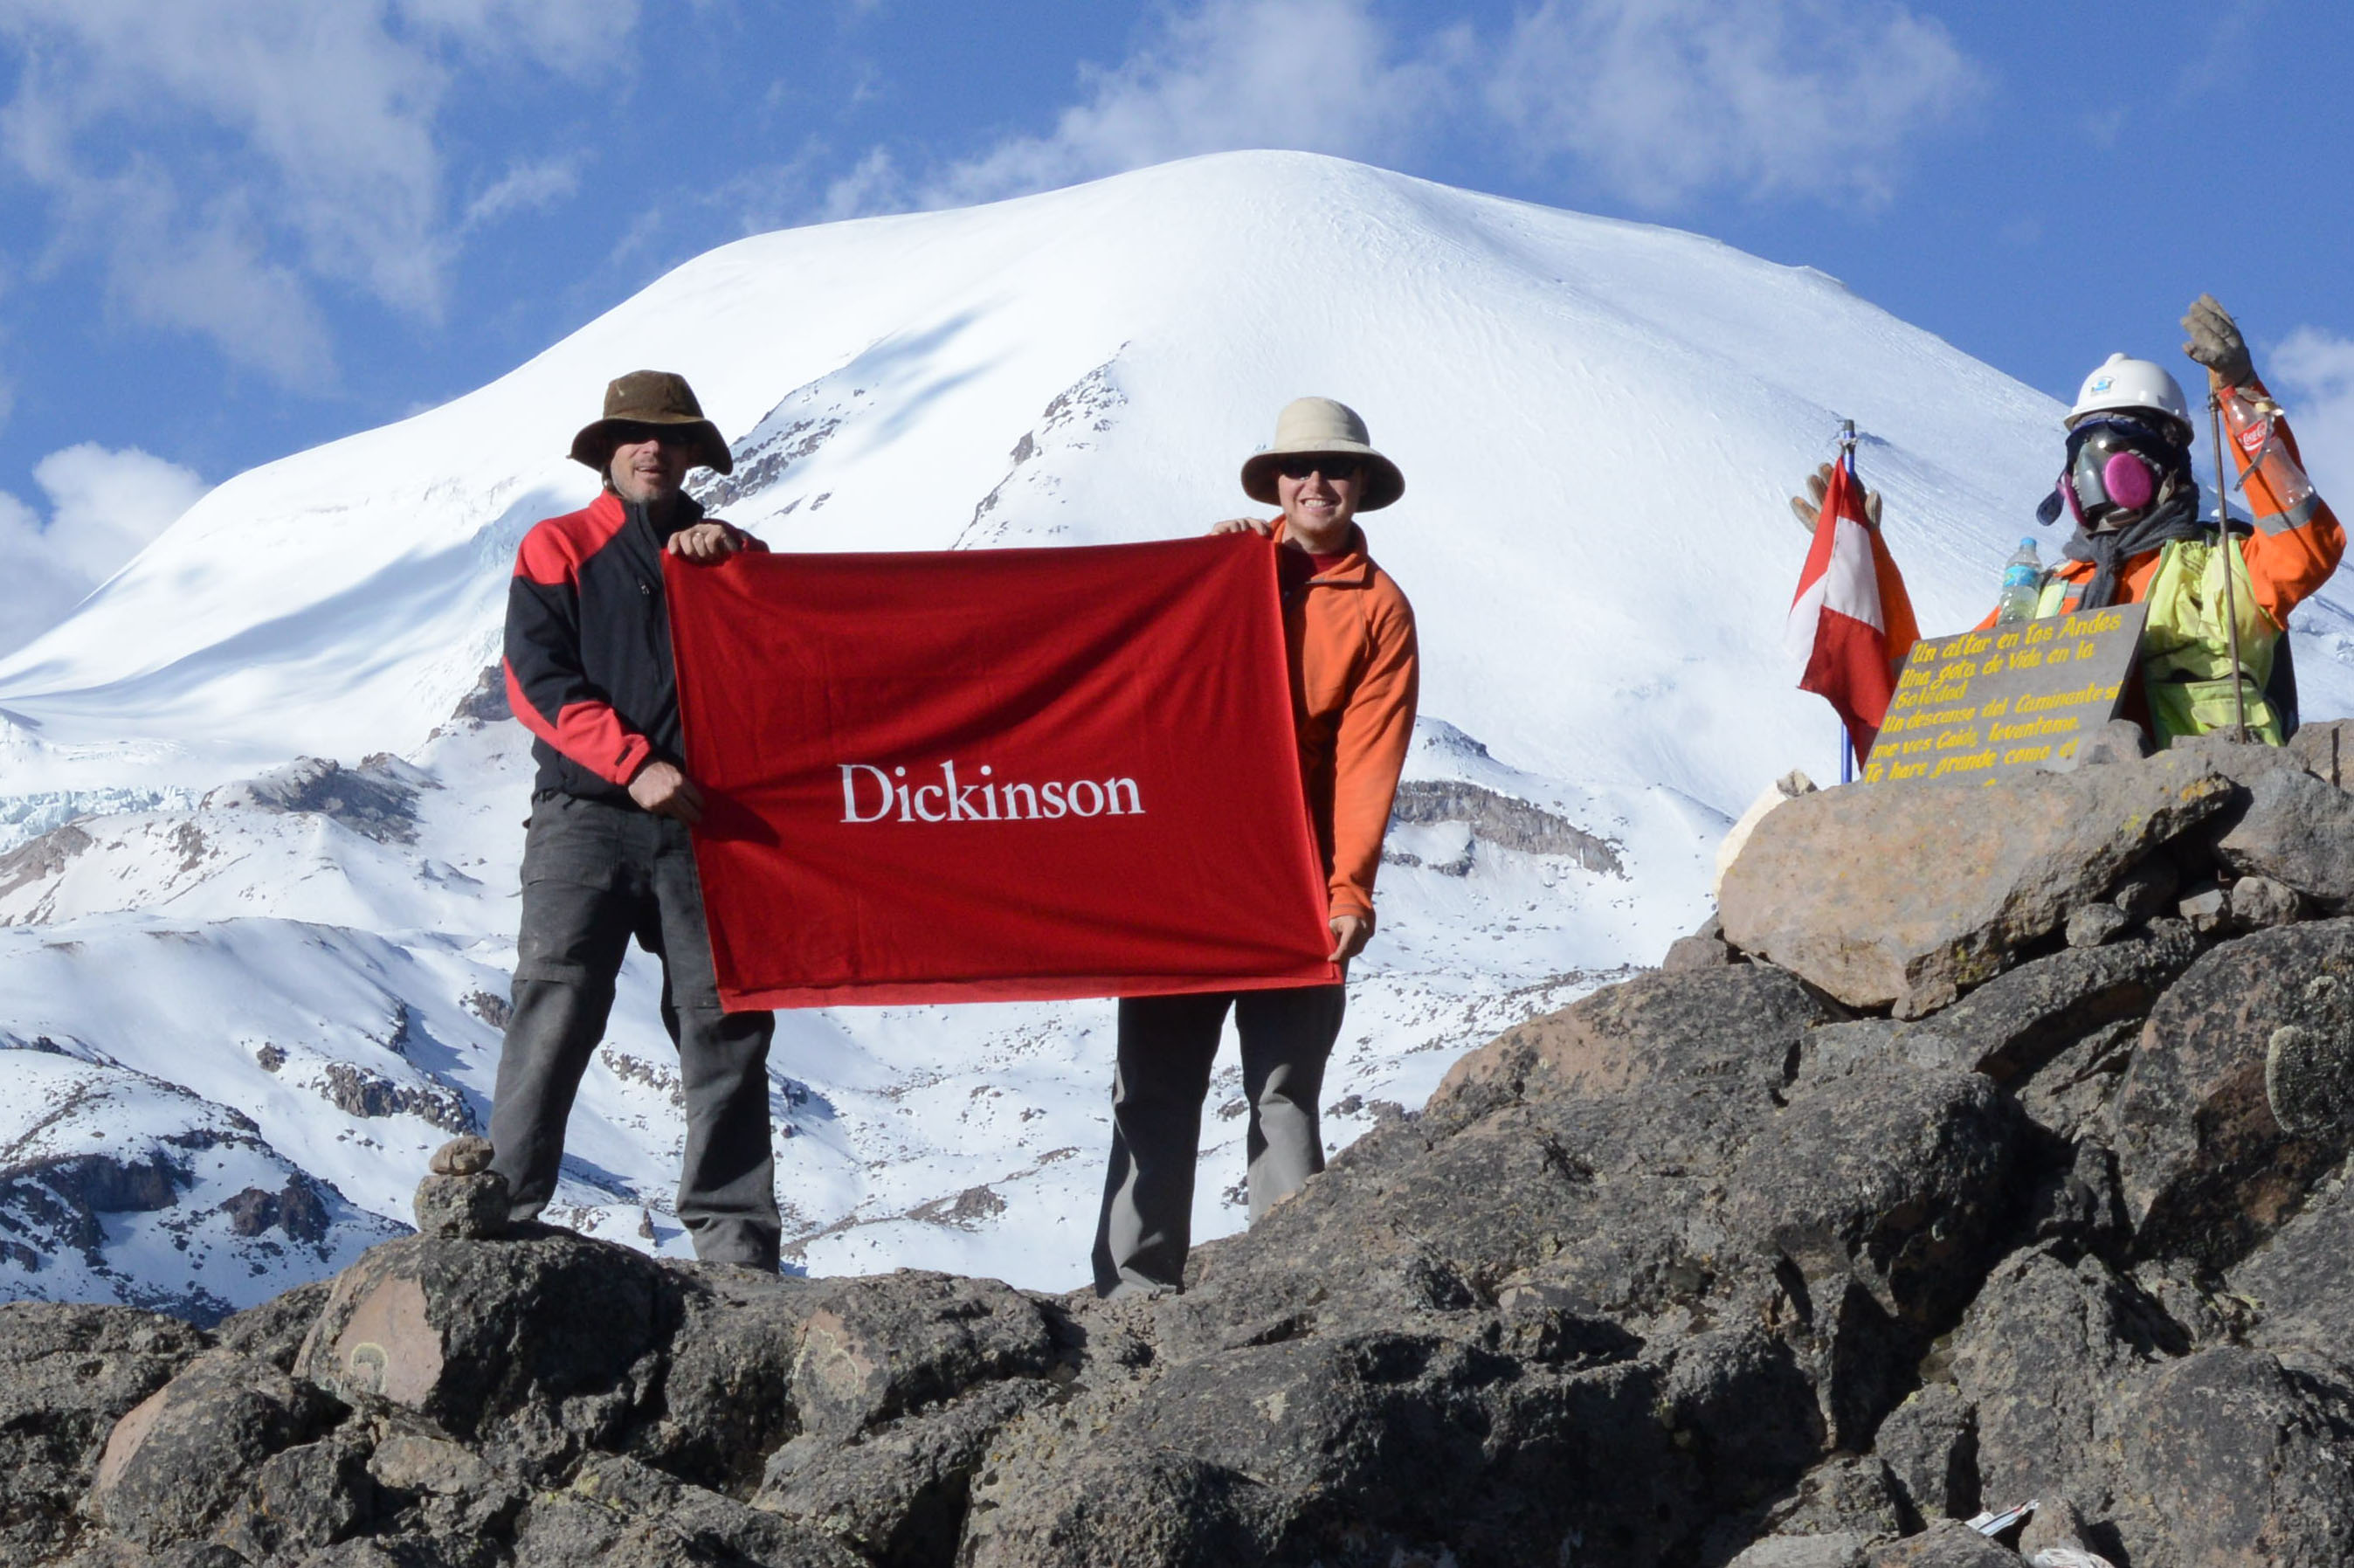 Students holding up a Dickinson sign on the Andes mountains.